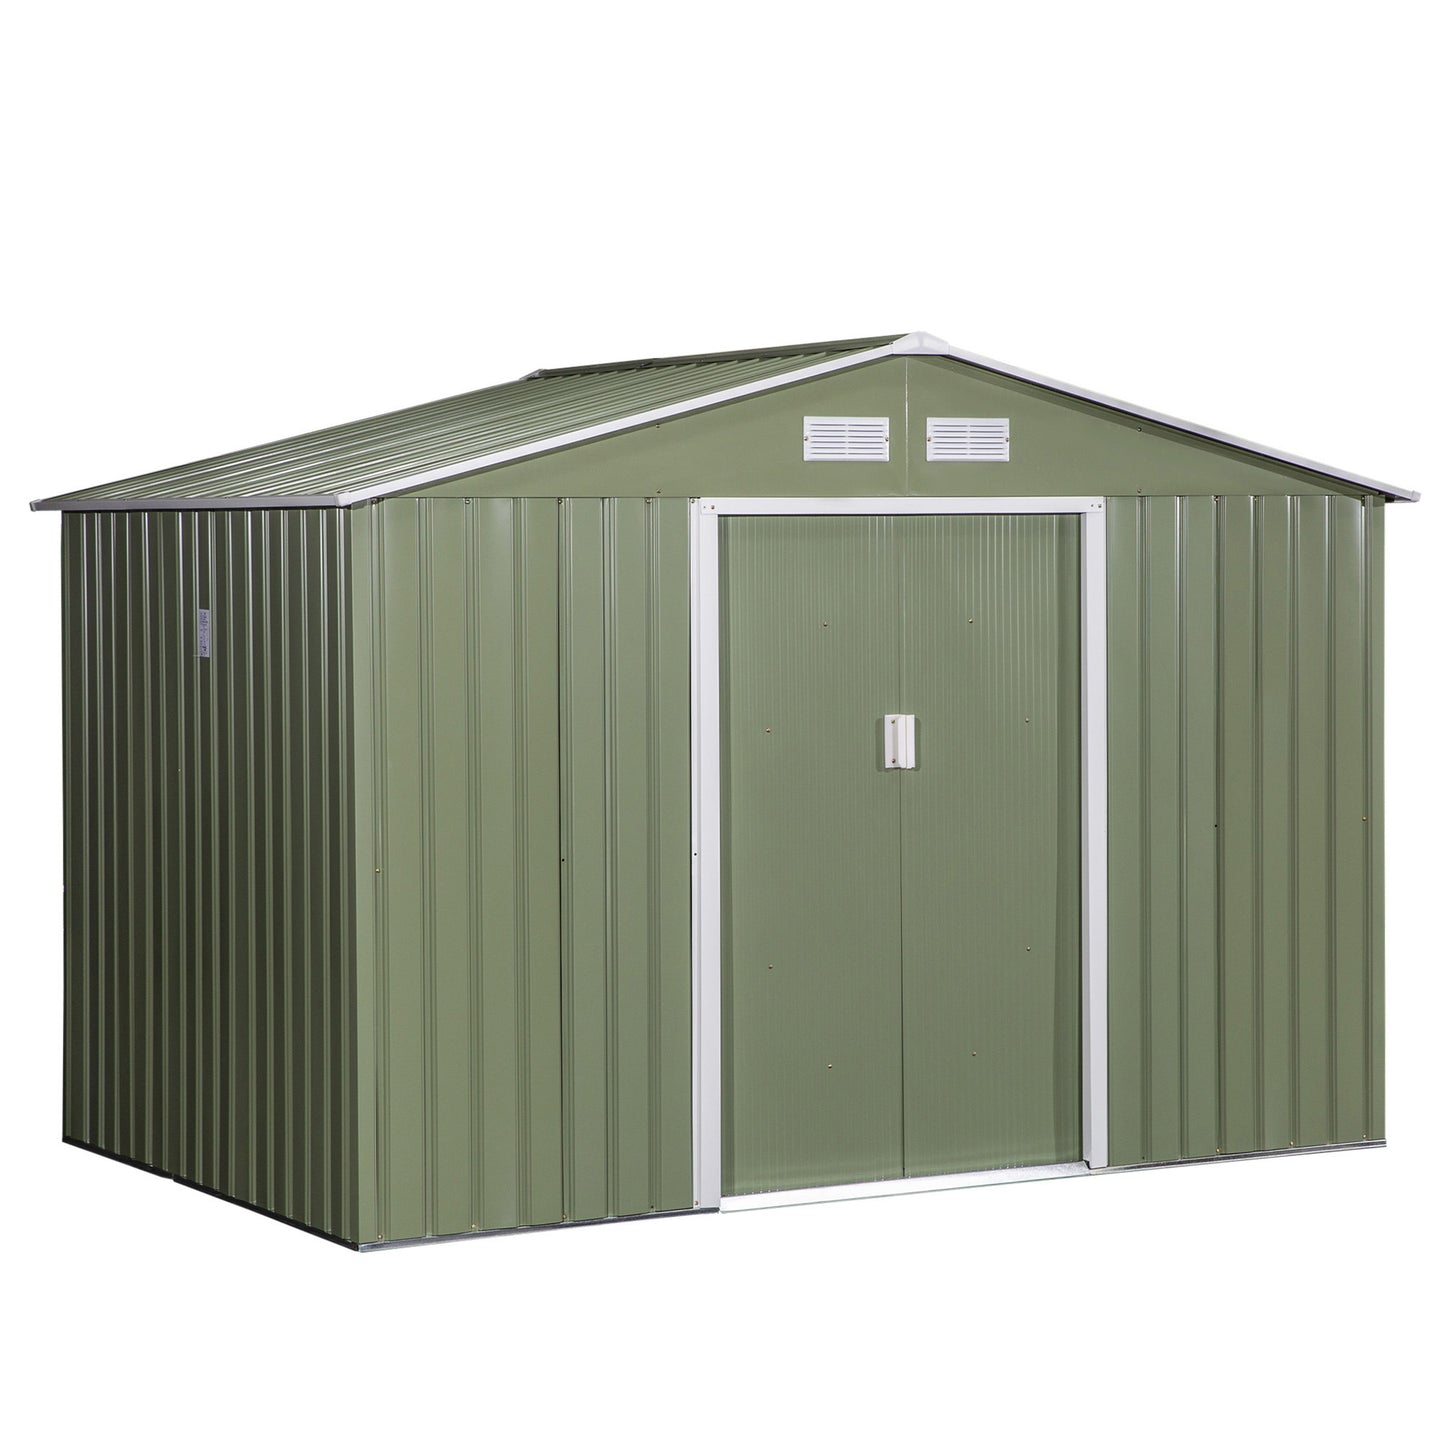 Outsunny 6.2 x 9ft Corrugated Steel Two Door Garden Shed - Light Green